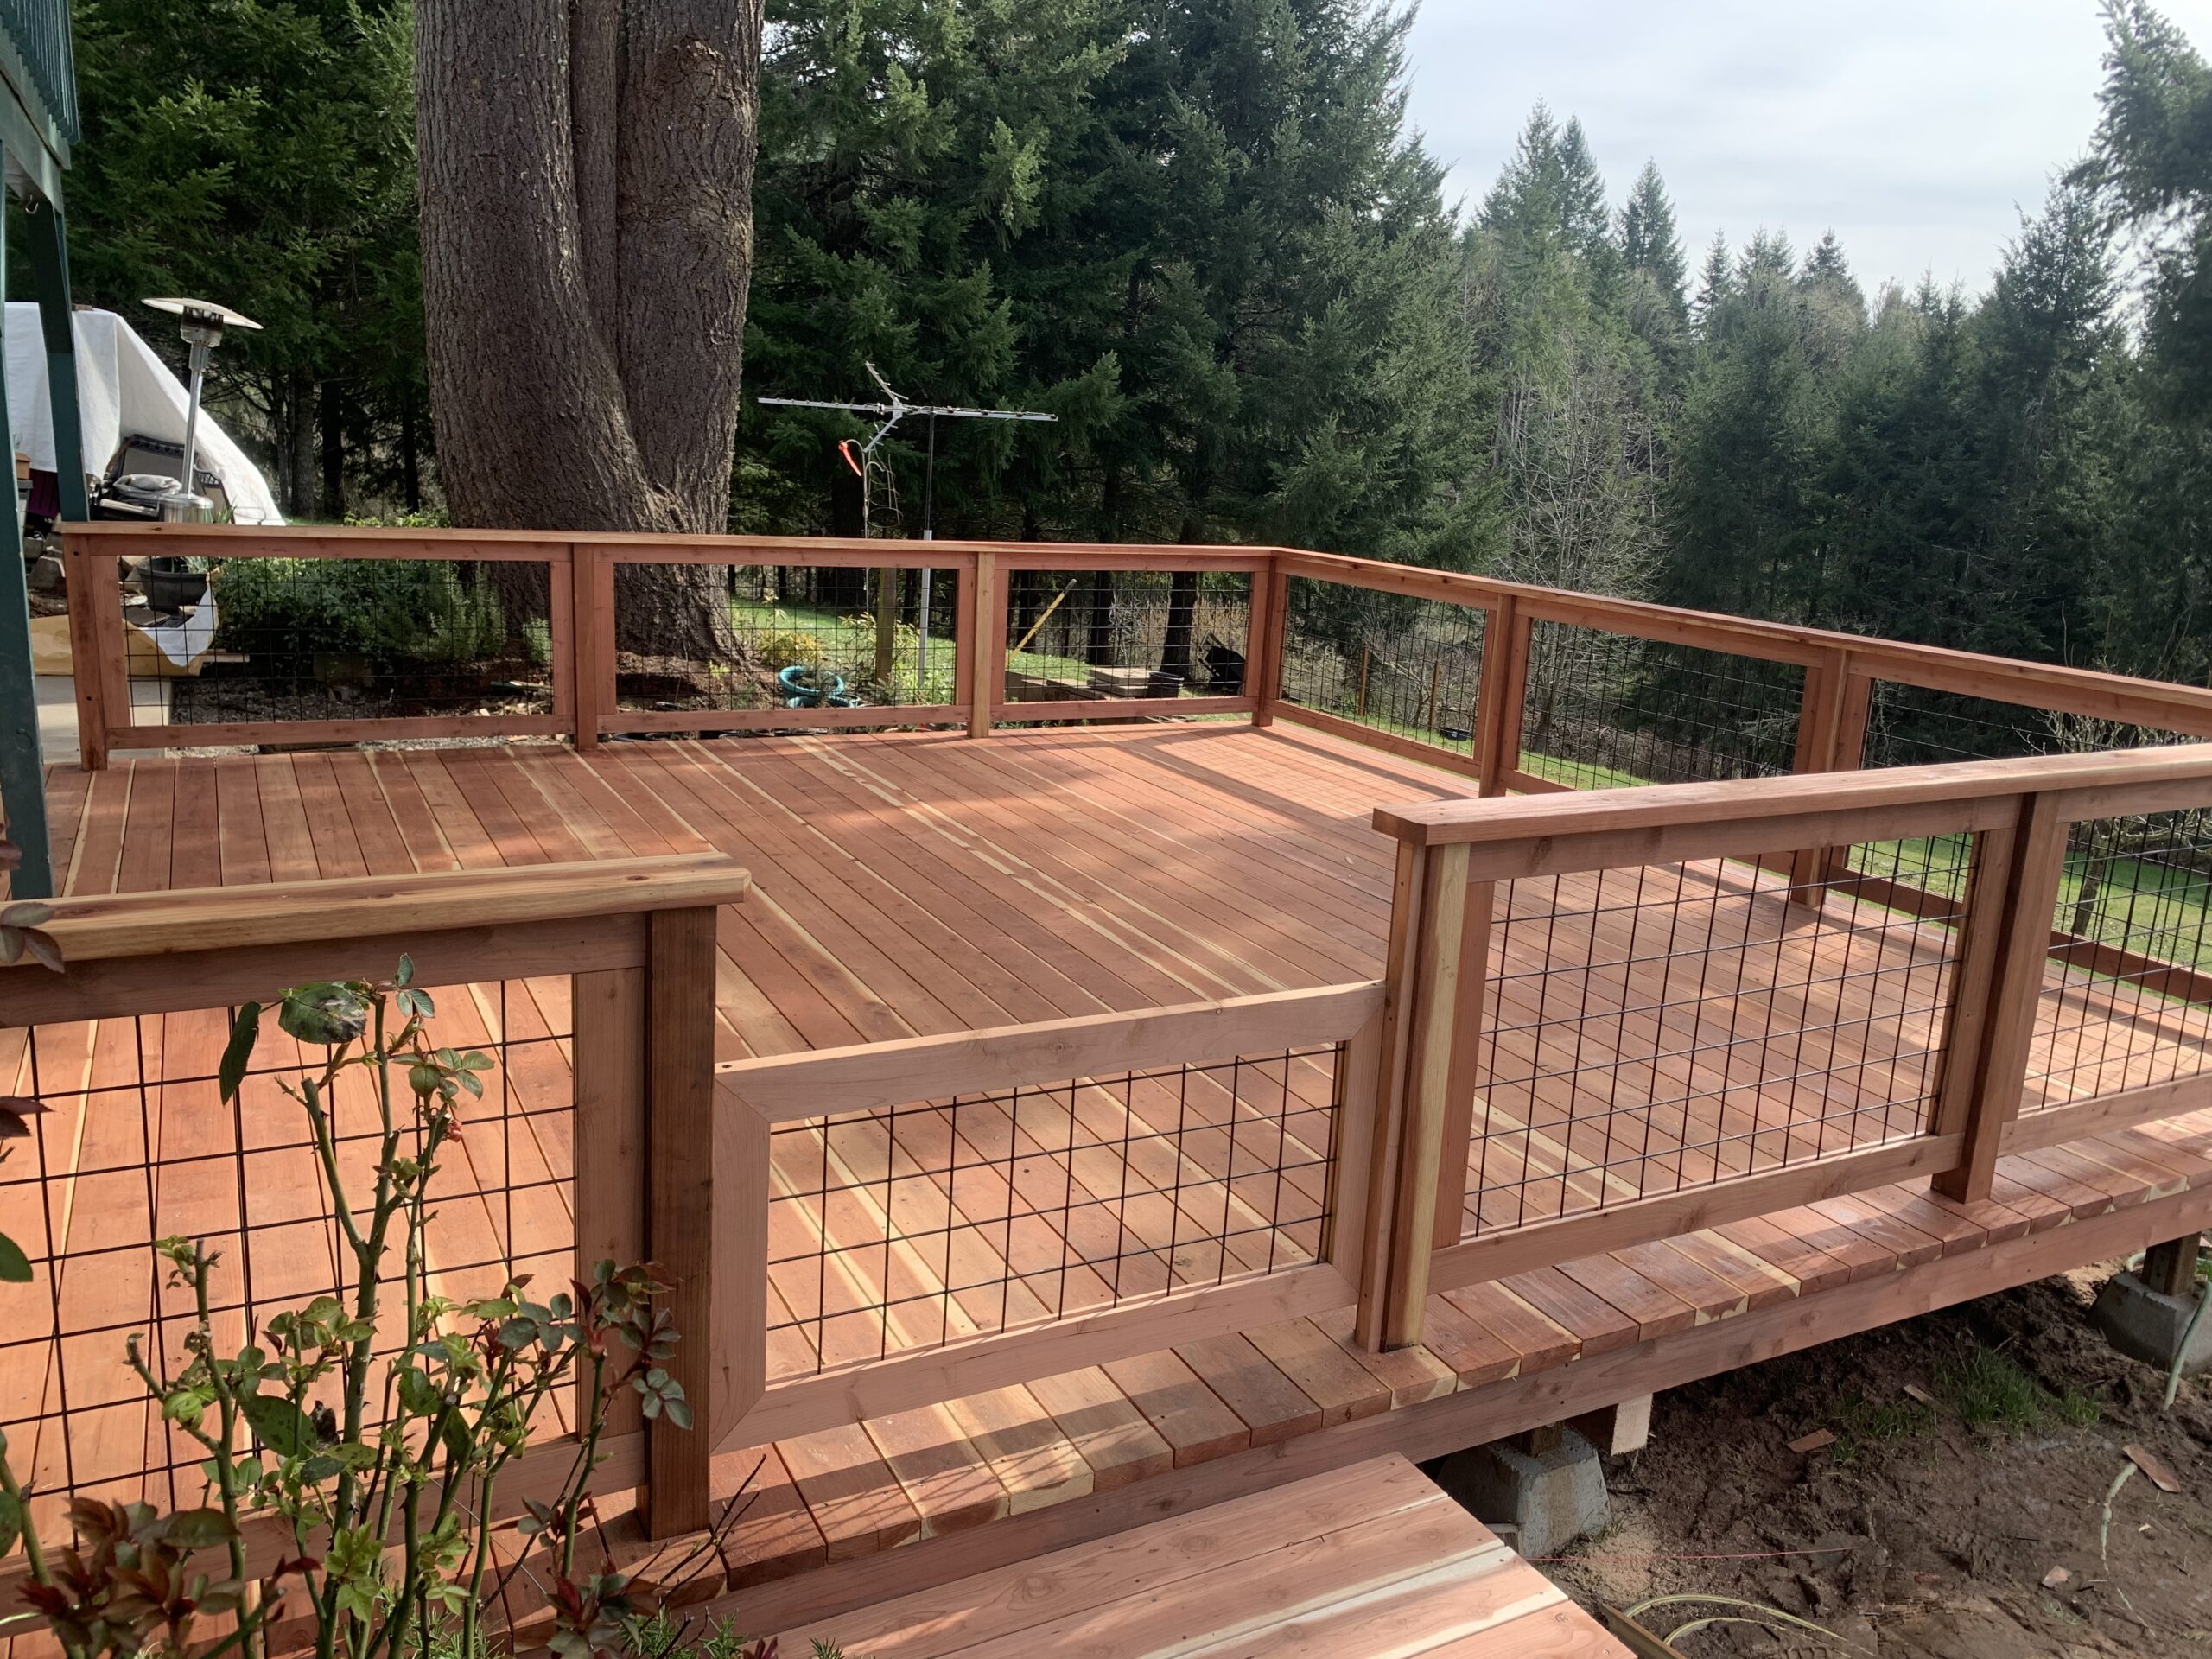 Square wooden deck with fencing